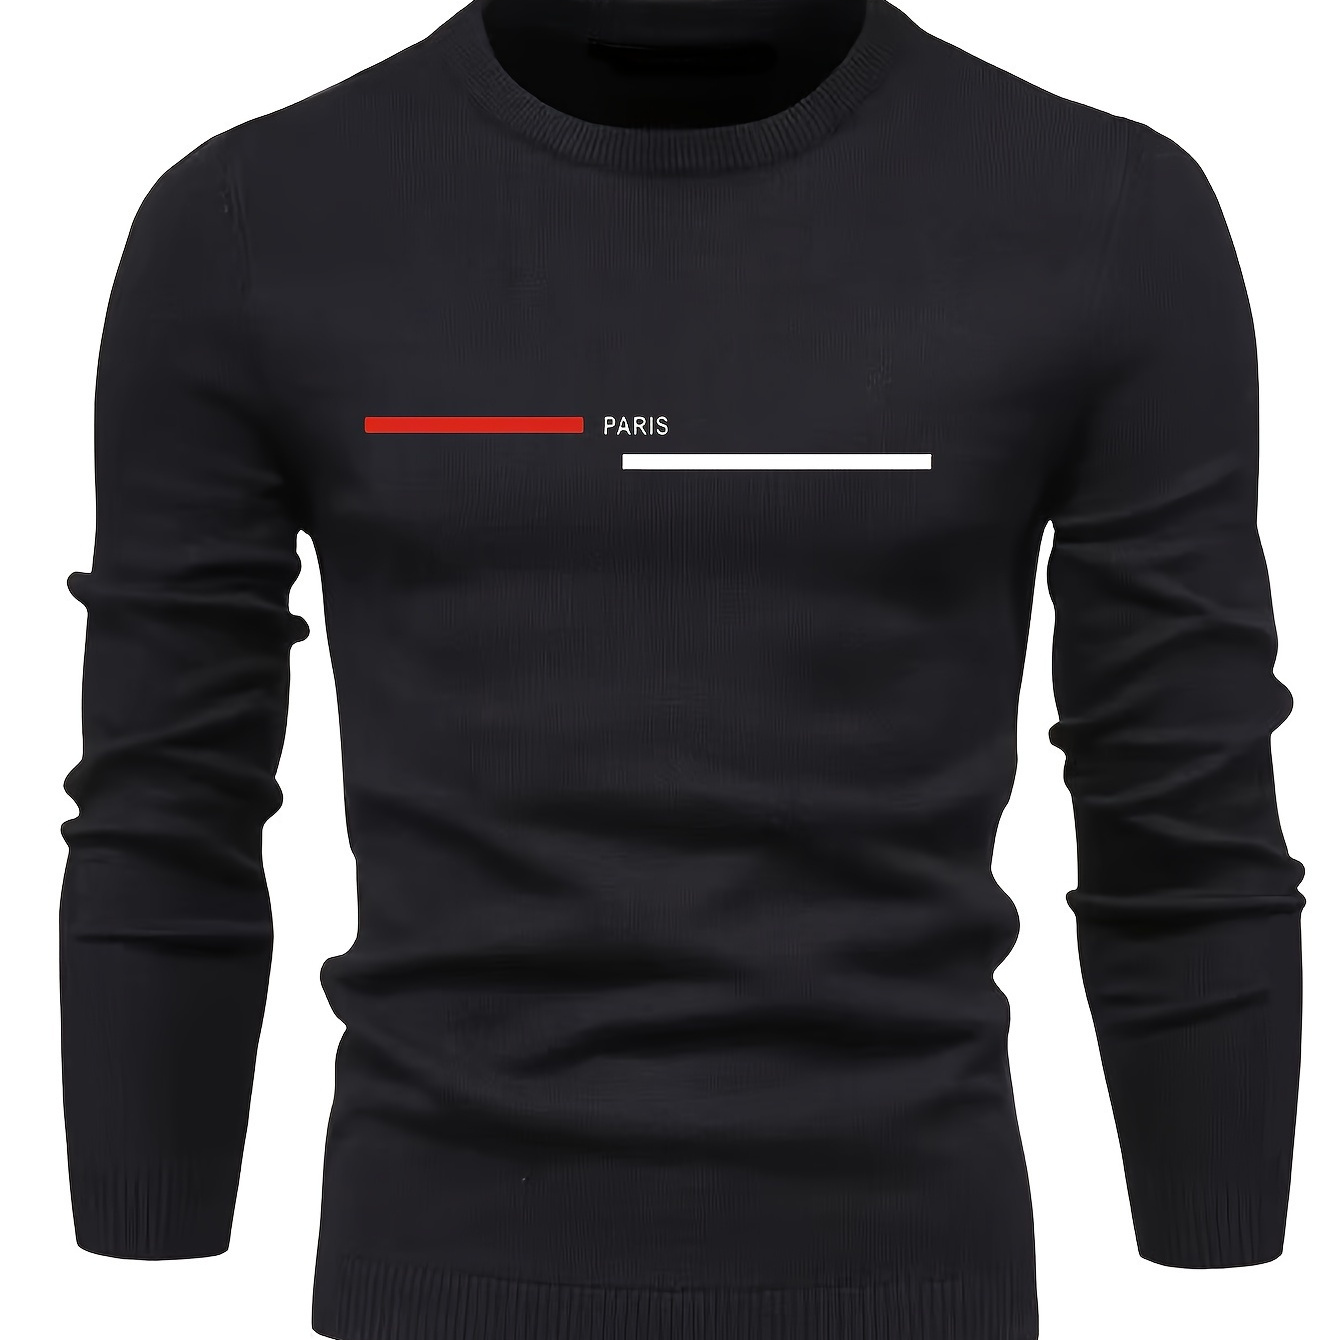 

Paris Print Men's Casual Stretch Long Sleeve Knitted Round Neck Sweater, Spring Fall Pullover Top